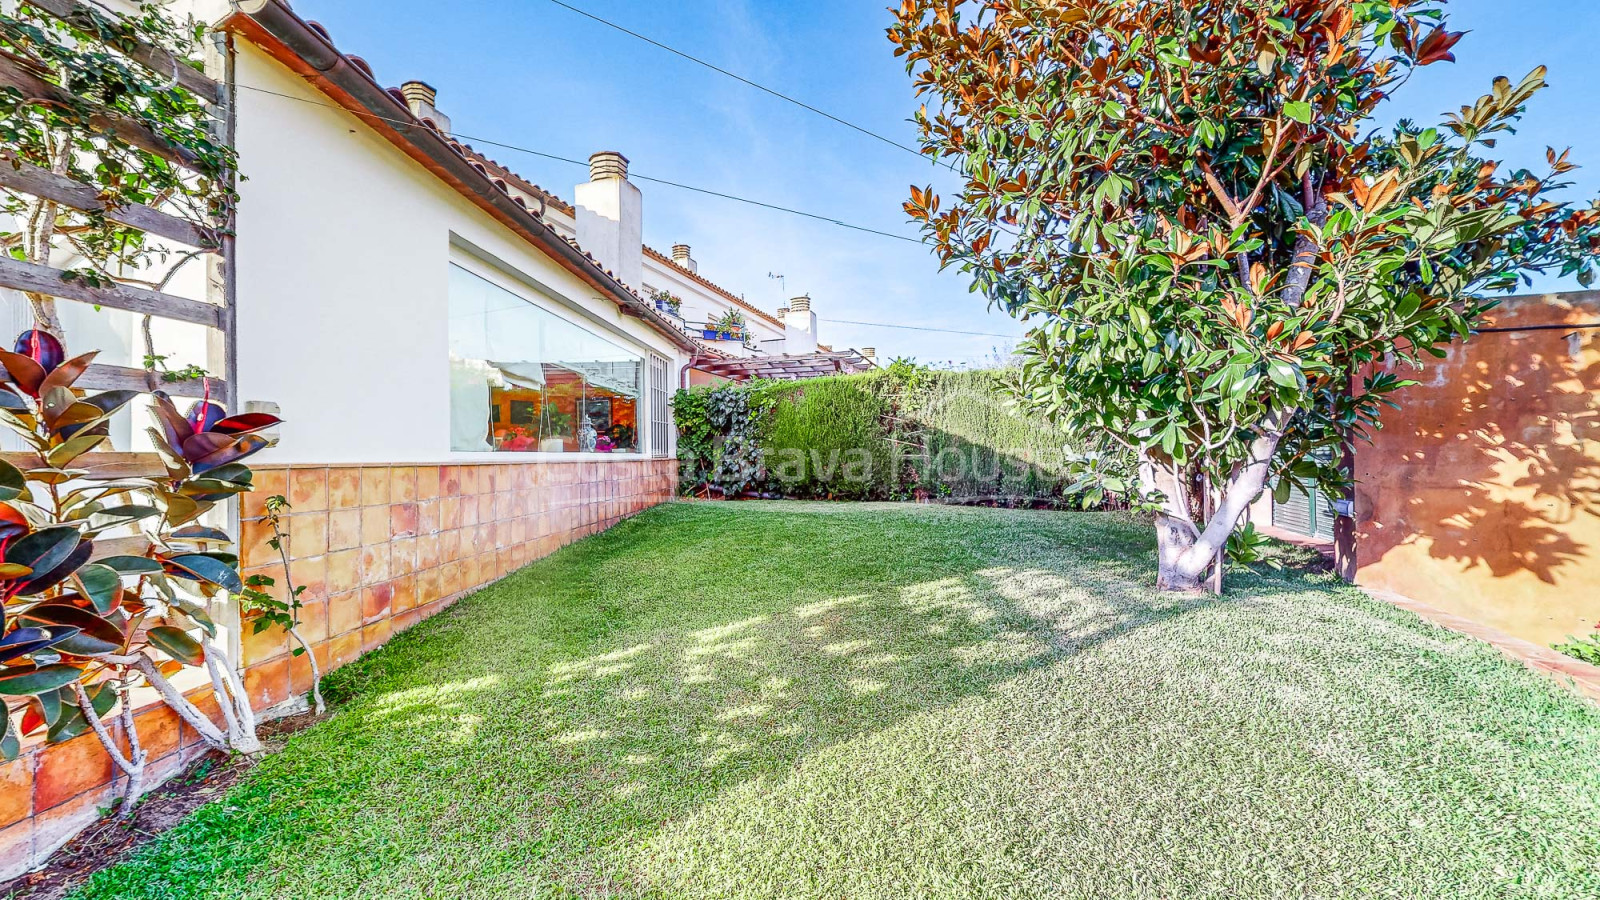 House with garden in Palamós, 2 minutes walk from La Fosca beach